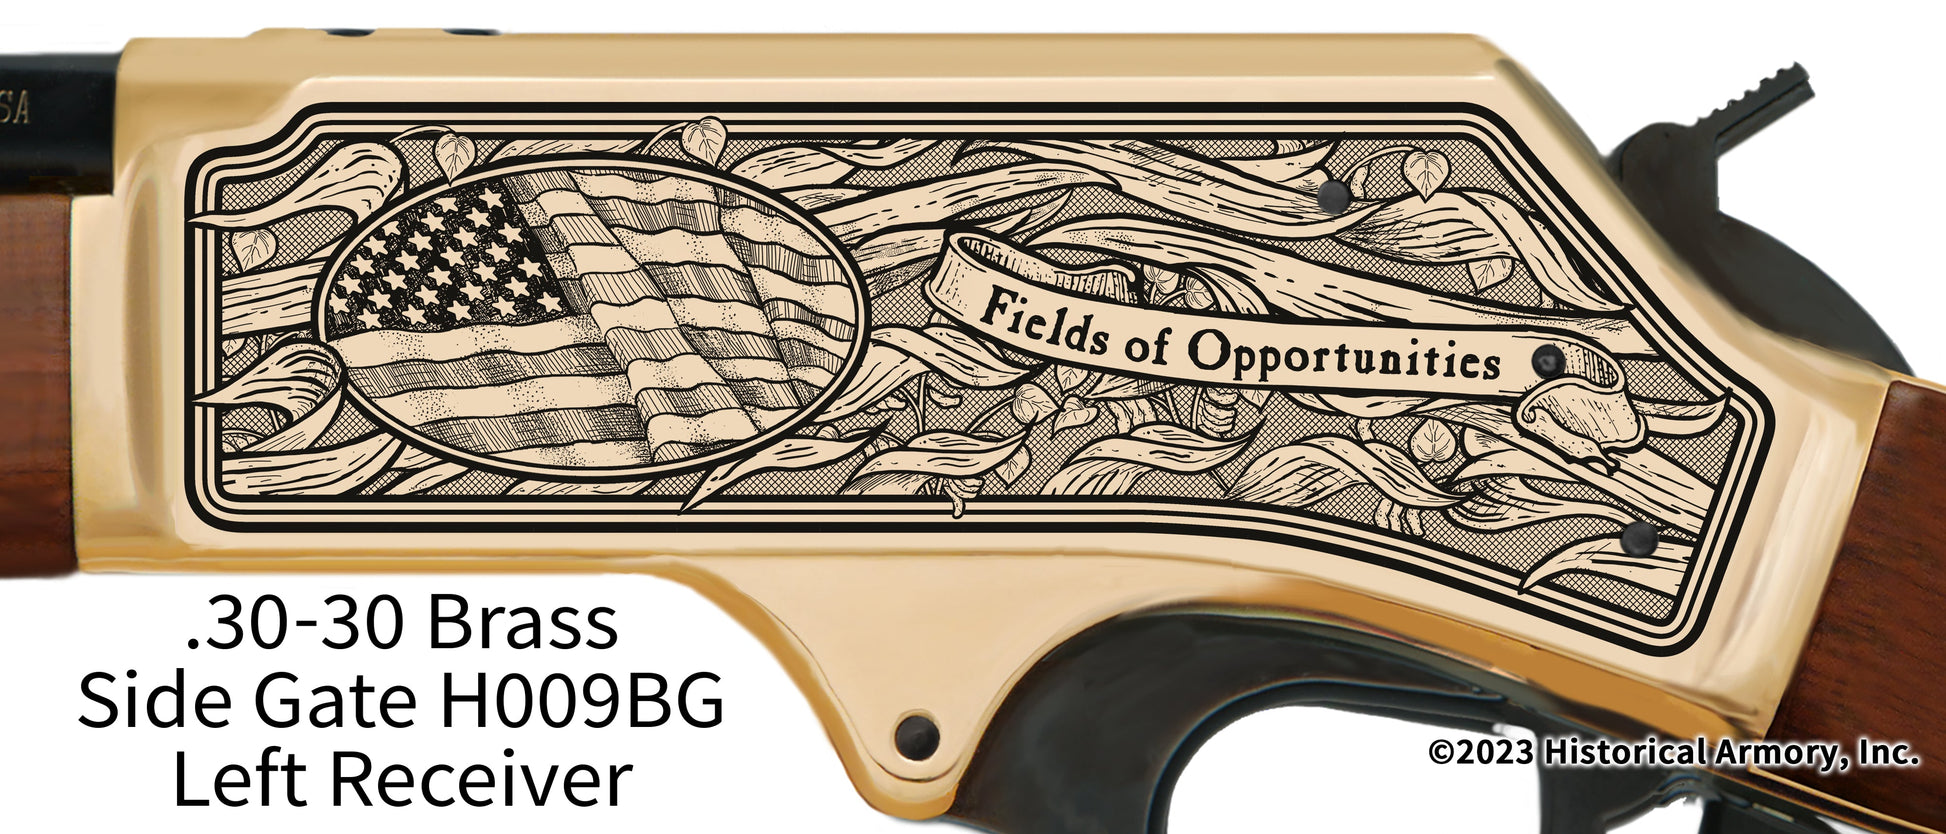 Iowa State Agricultural Heritage Henry .30-30 Brass Side Gate Engraved Rifle